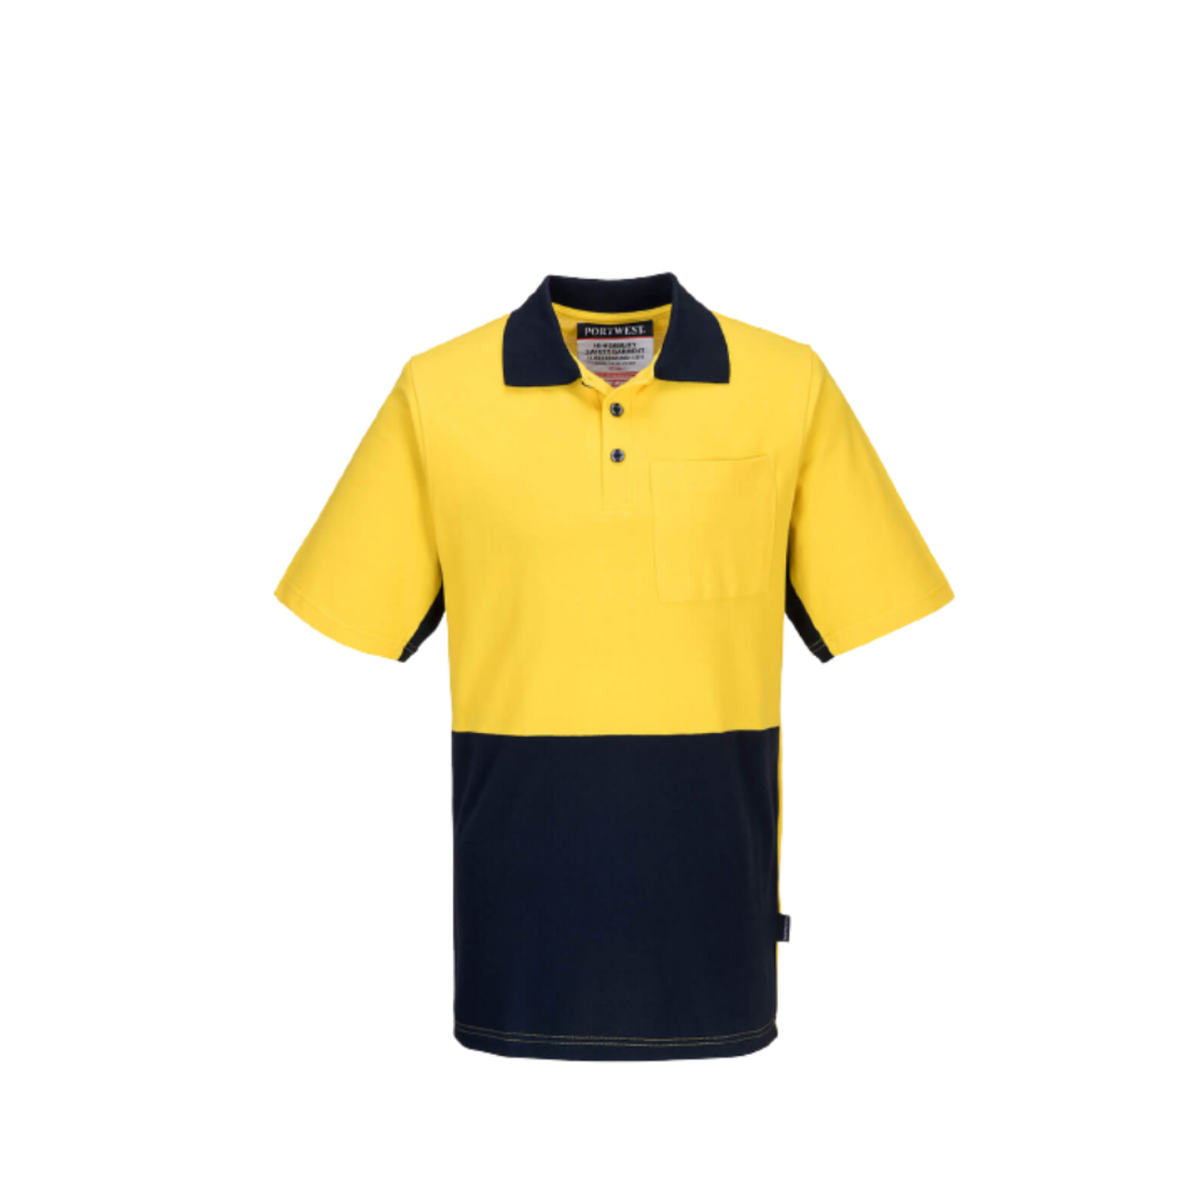 Portwest Short Sleeve Cotton Pique Polo Breathable Cottong Shirt MD618-Collins Clothing Co